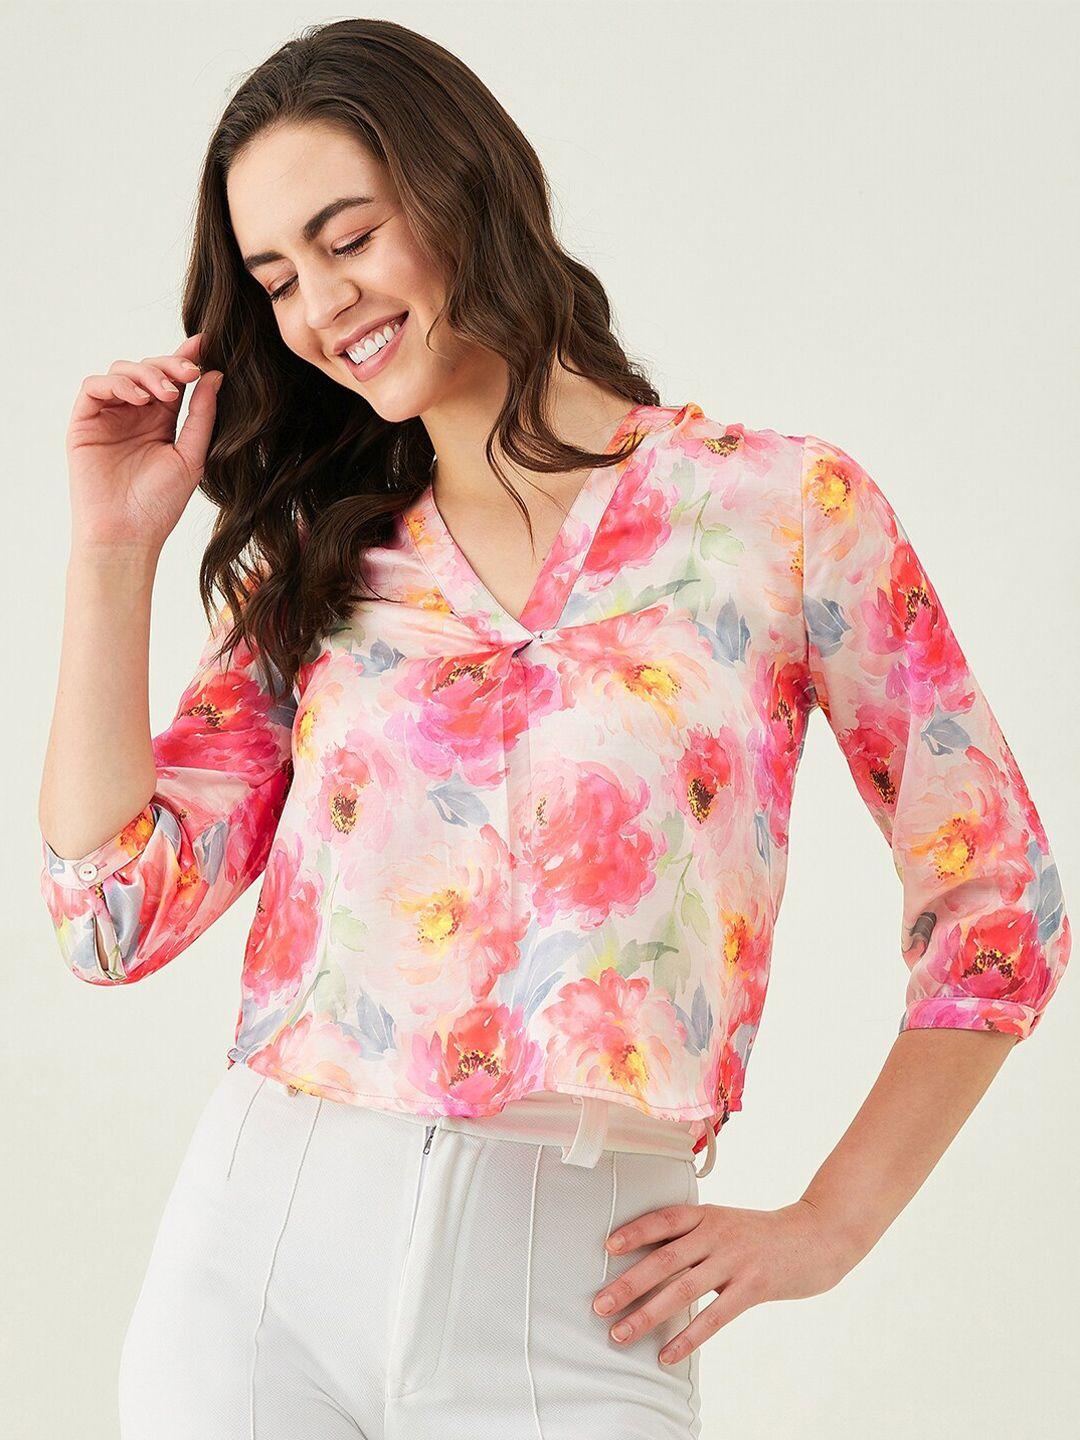 modeve floral print shirt style top